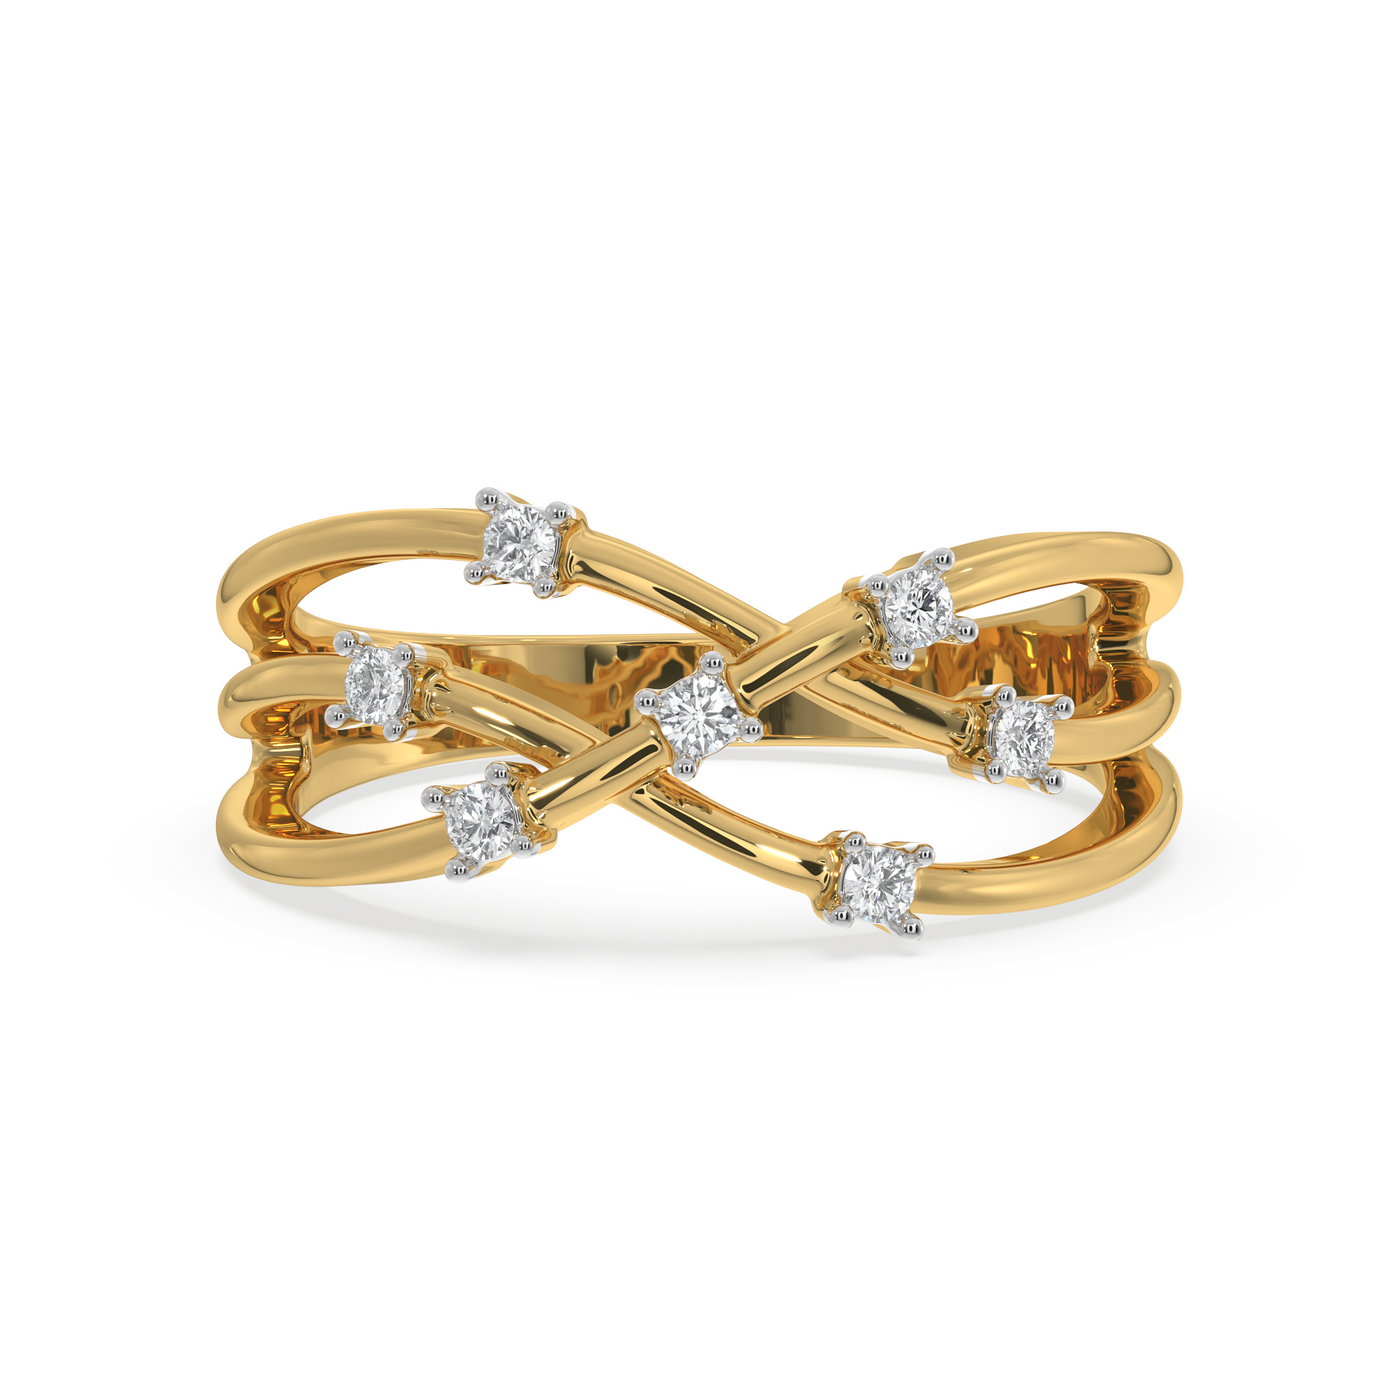 SY Women's Ring in Gold, Whispering Winds Diamond